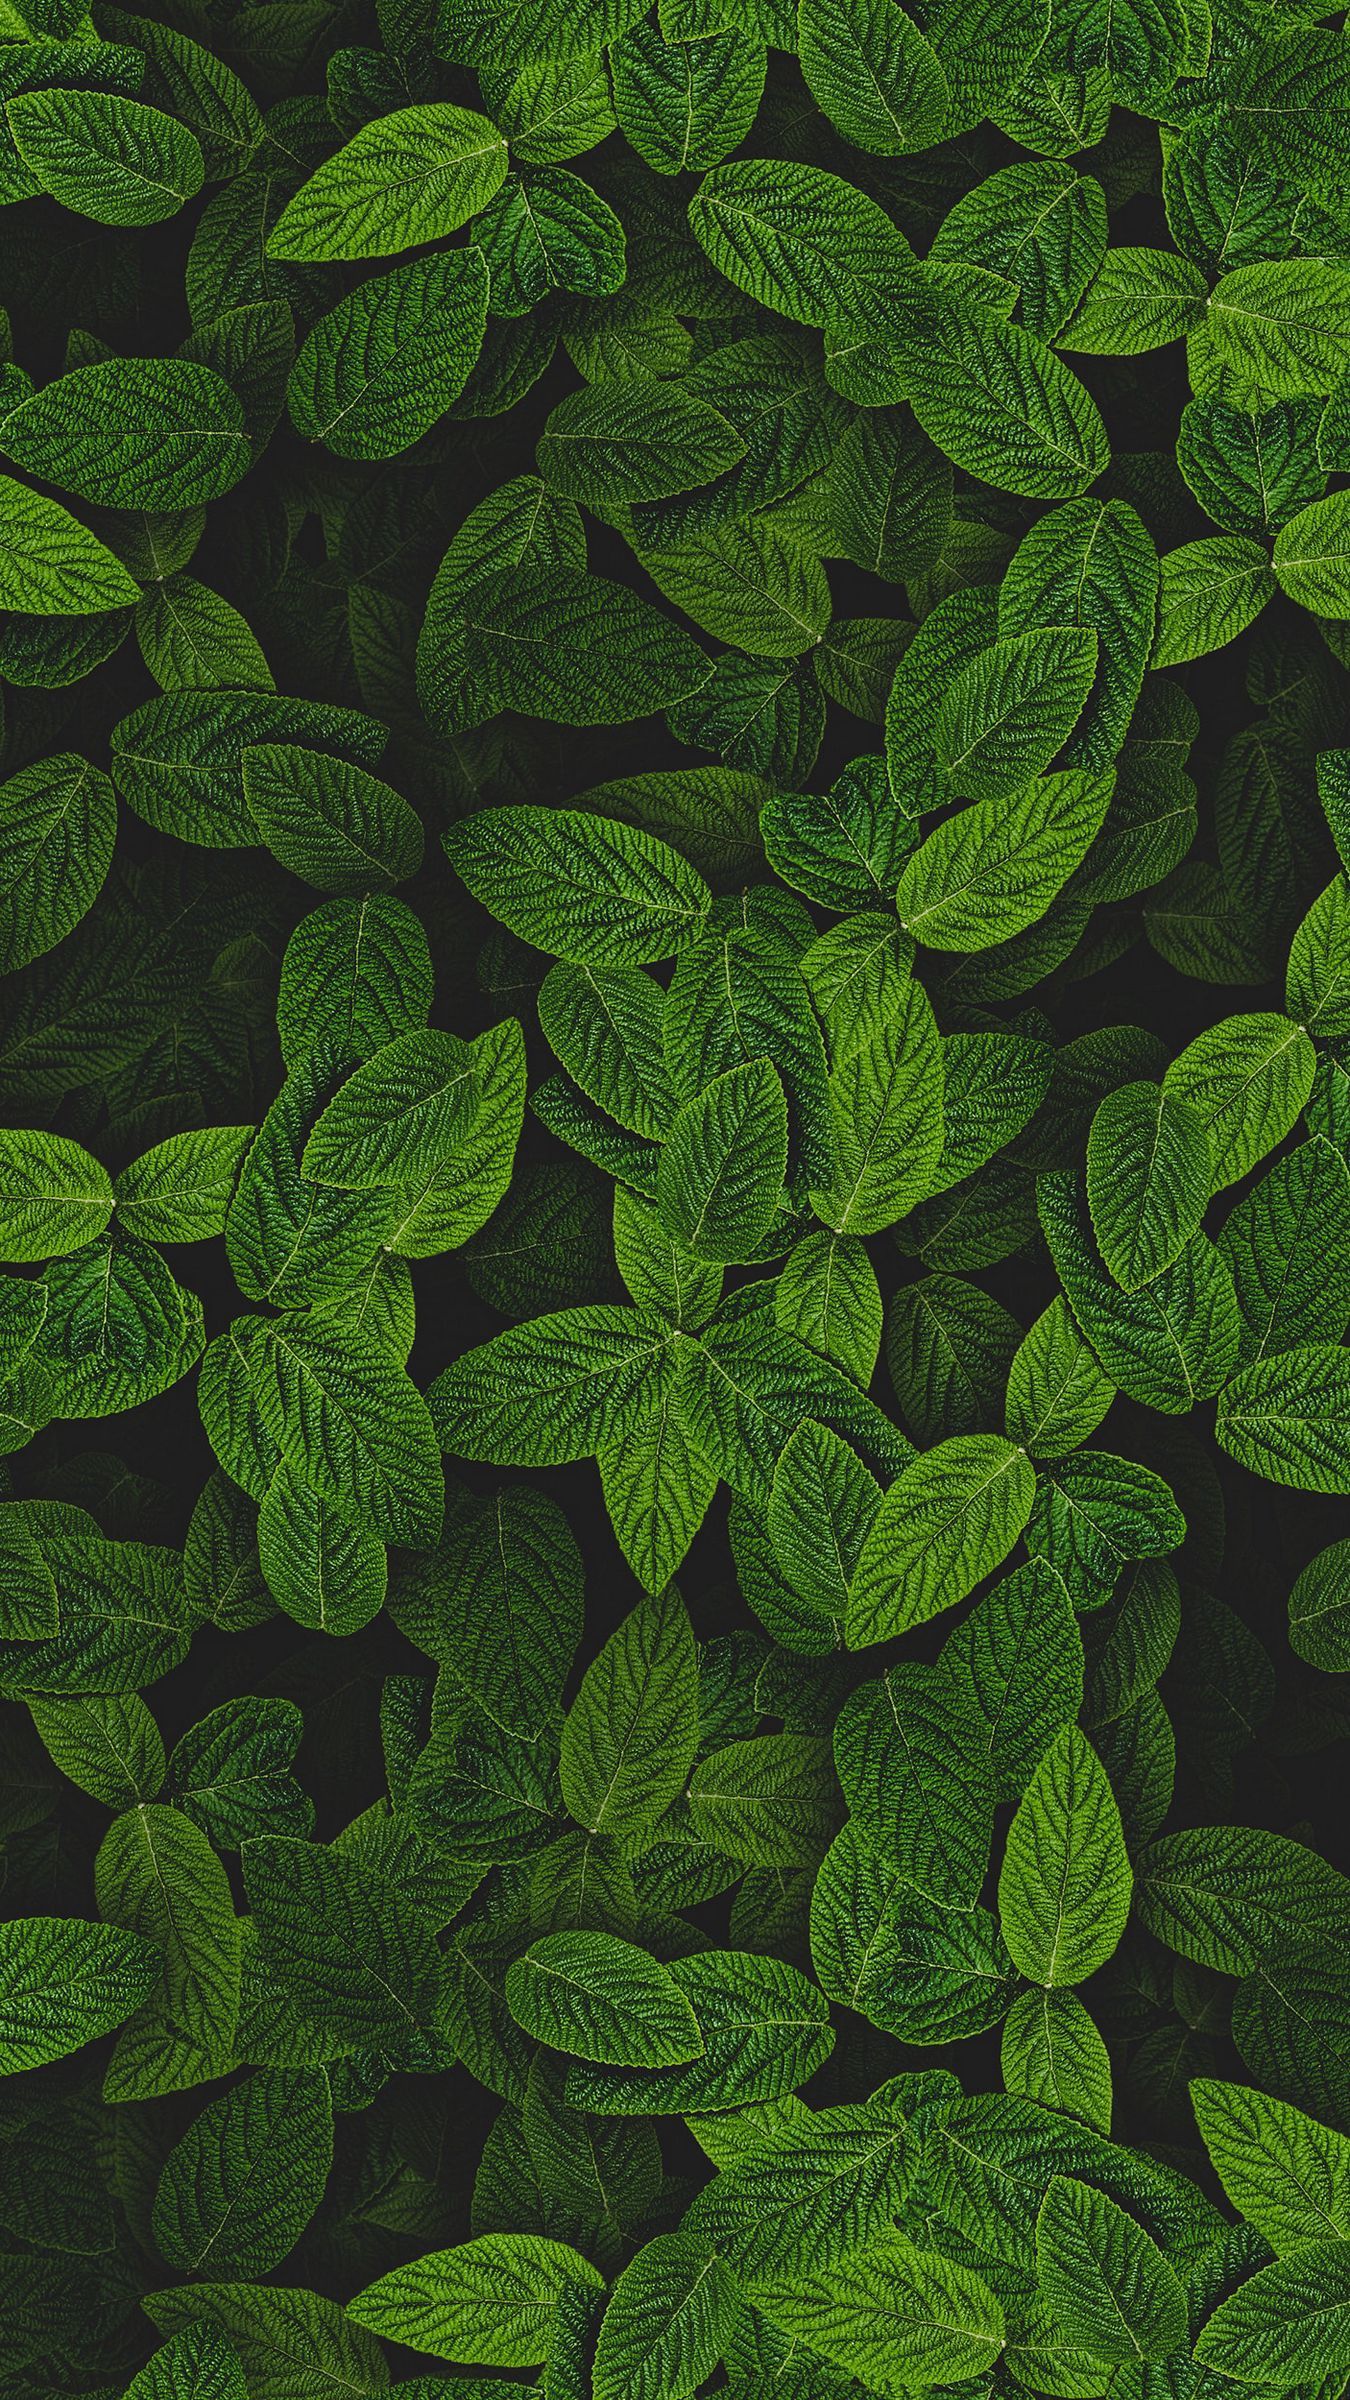 Mint Leaves Wallpapers - Wallpaper Cave